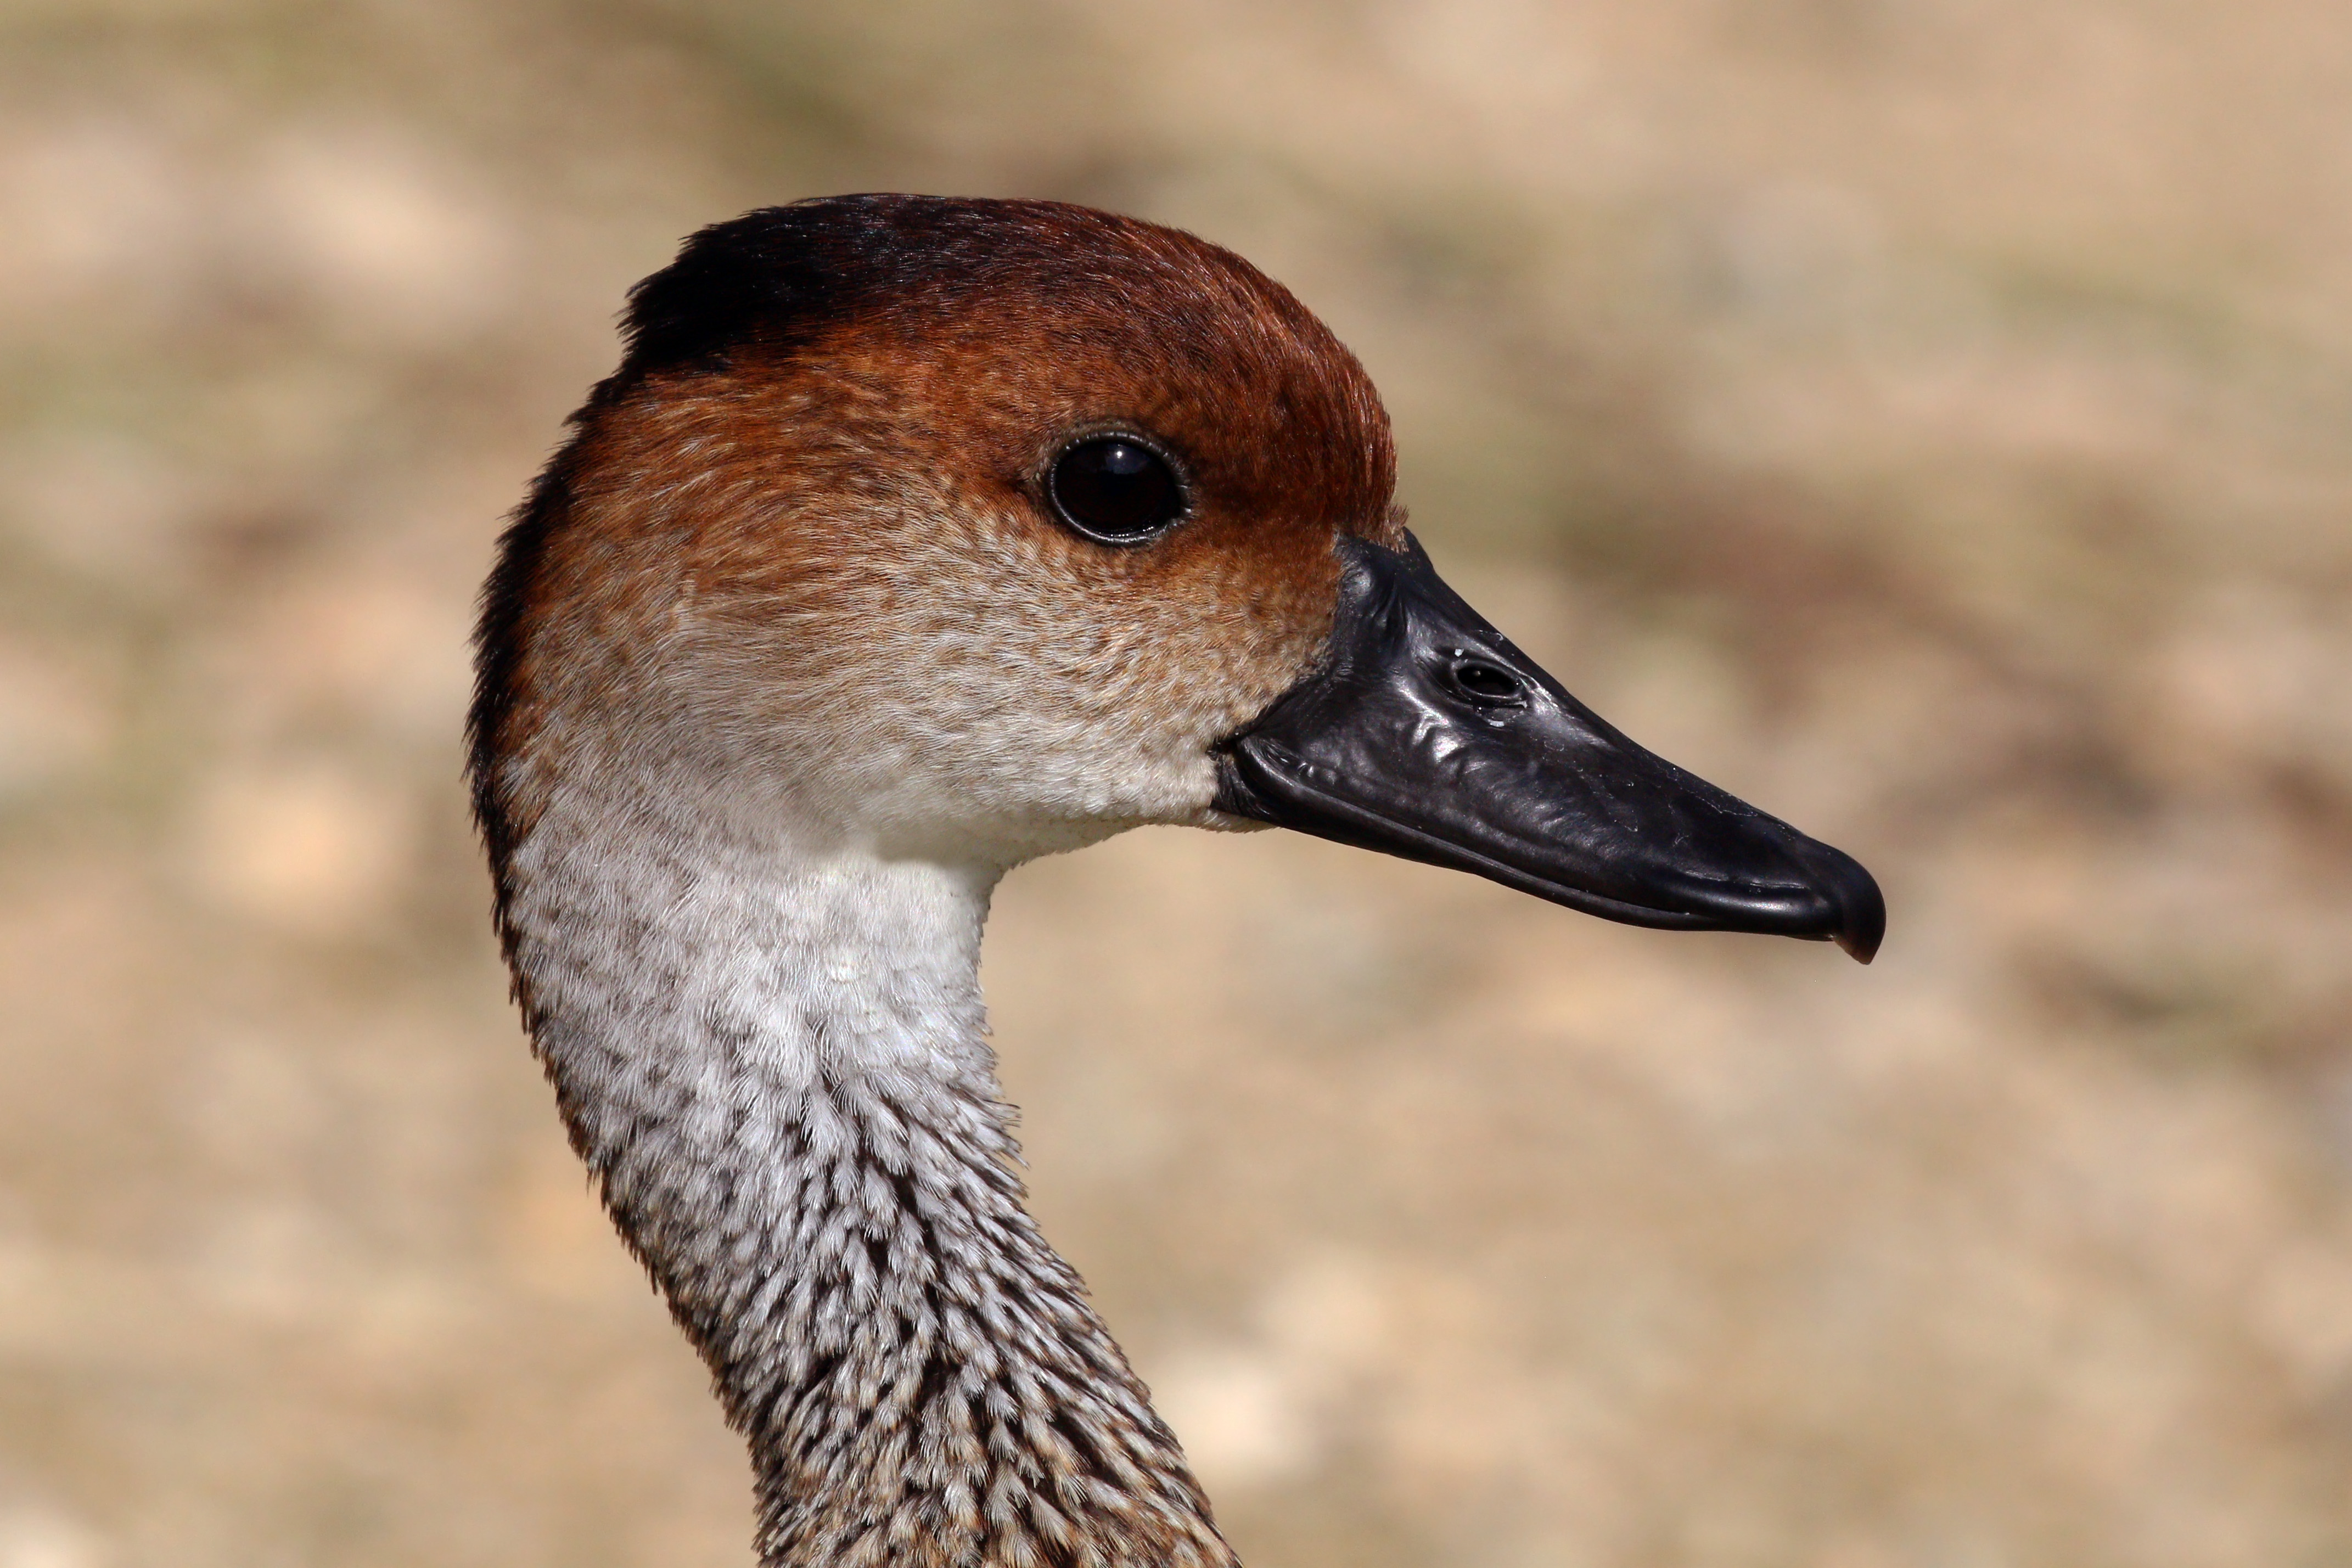 West Indian whistling duck (Dendrocygna arborea) head